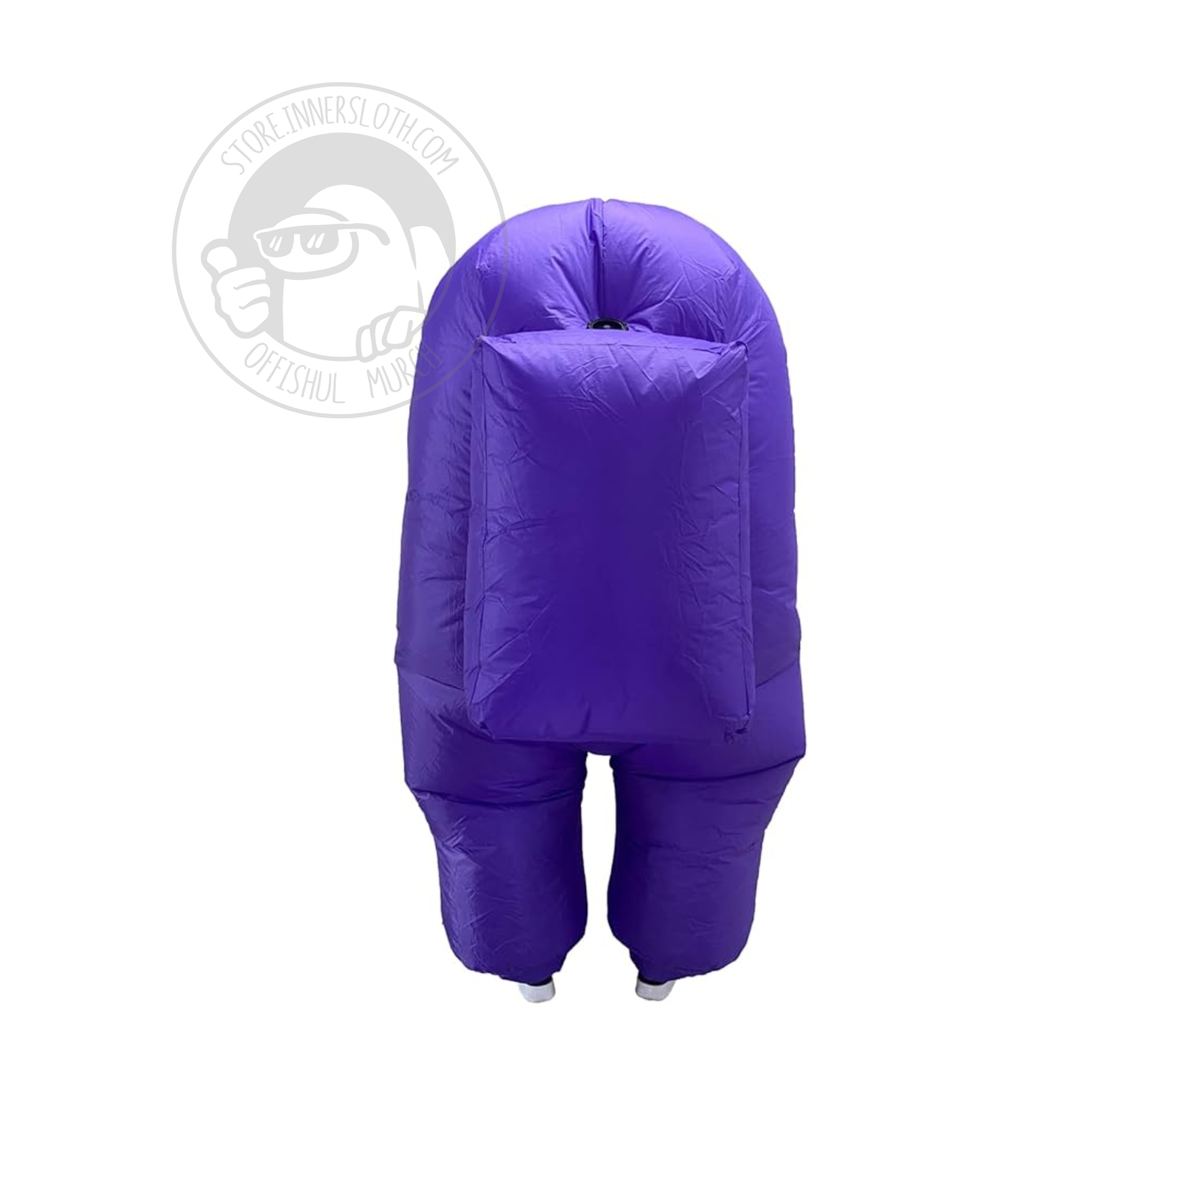 Back view of the Purple inflatable Impostor costume.